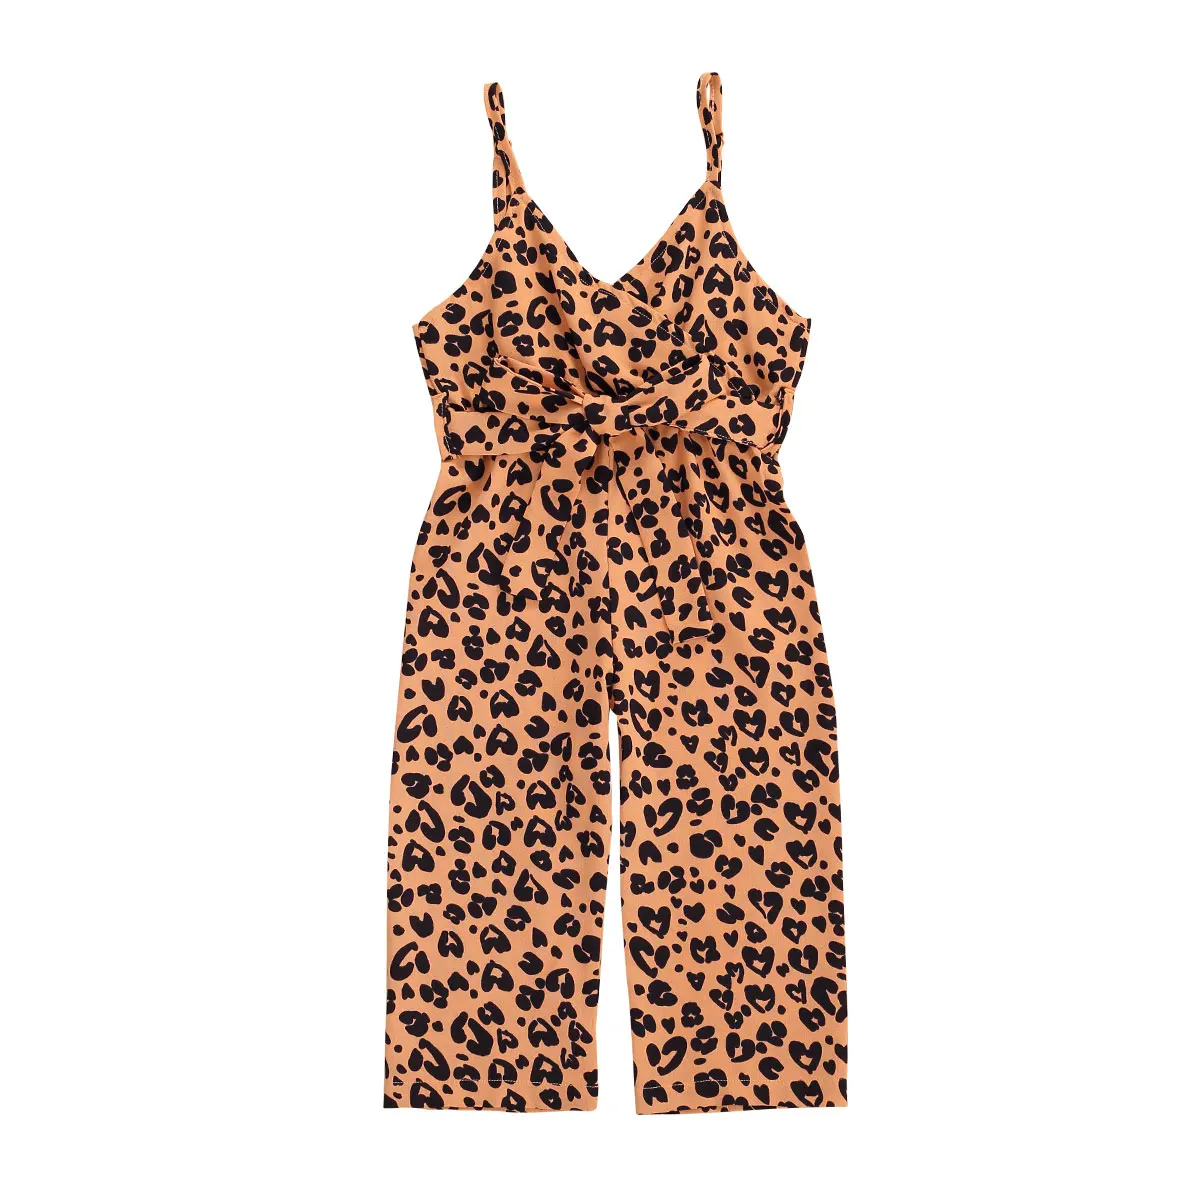 Baby Bodysuits are cool 2020 1-6Y 8 Colors Toddler Kids Girls Romper Leopard/Floral Print Sleeveless Bow Jumpsuit Playsuit One Piece Holiday Outfit cool baby bodysuits	 Baby Rompers